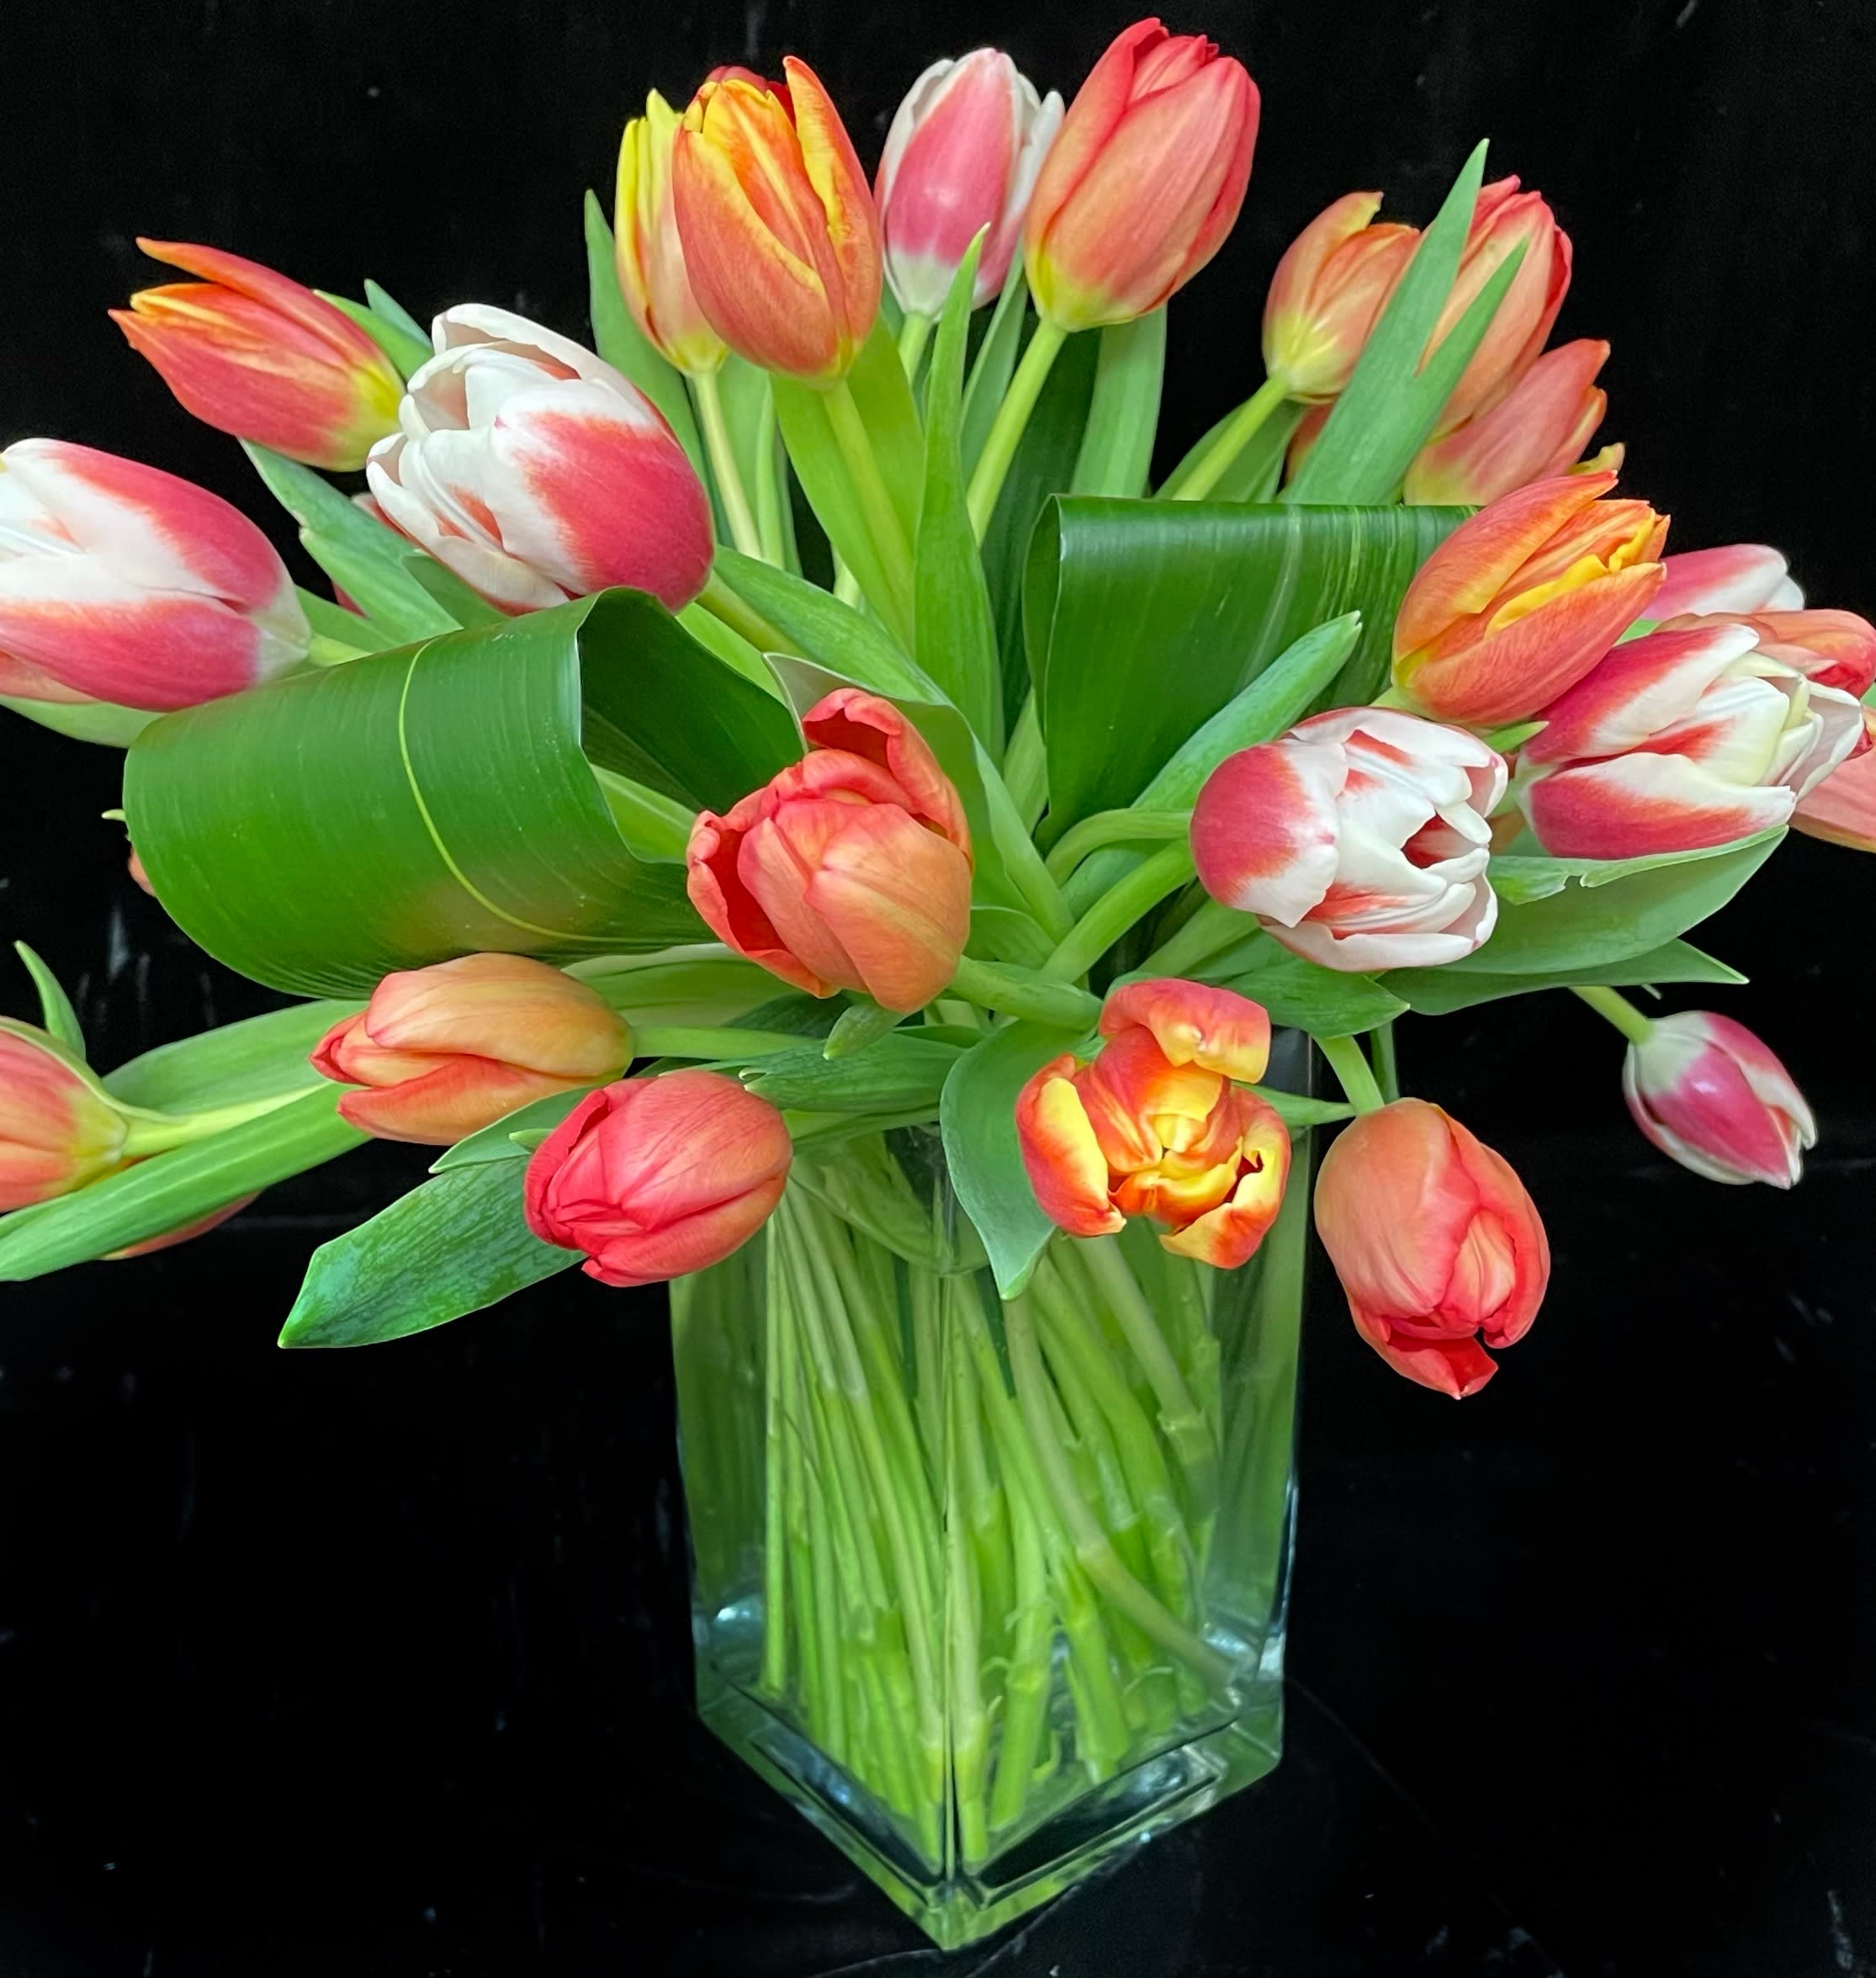 Grand Tulips - Splendid mix of our favorite  flower-TULIPS Make your gift extra special and add the chocolate Advent Calendar!